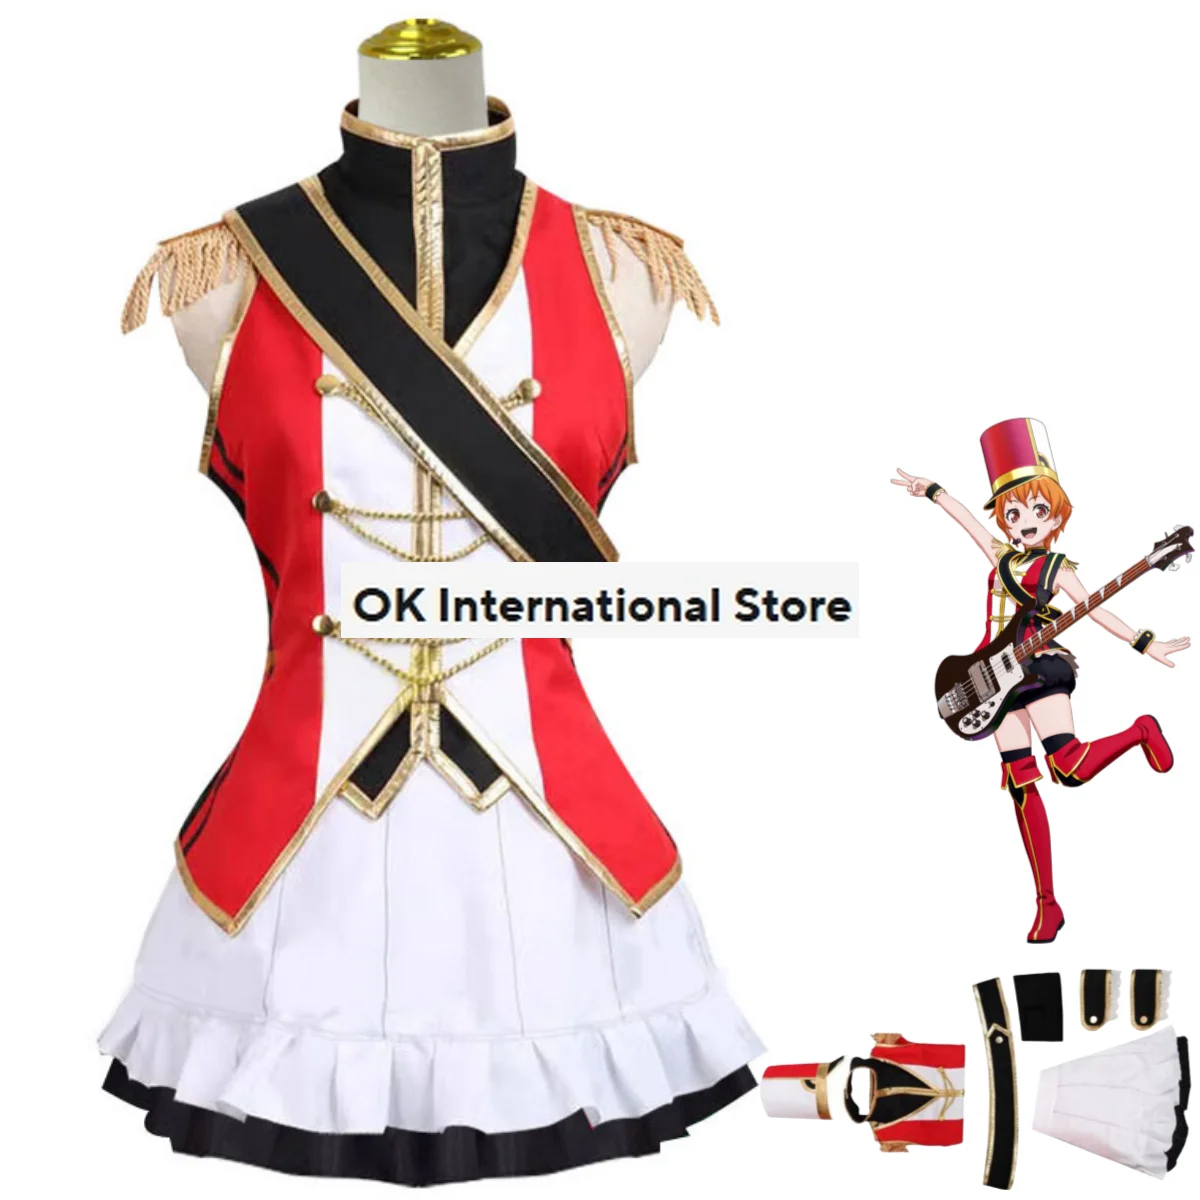 

Anime BanG Dream Captain Cosplay Costume Hello, Happy World! Team Leader Red Uniform Skirt Woman Sexy Kawaii Carnival Suit